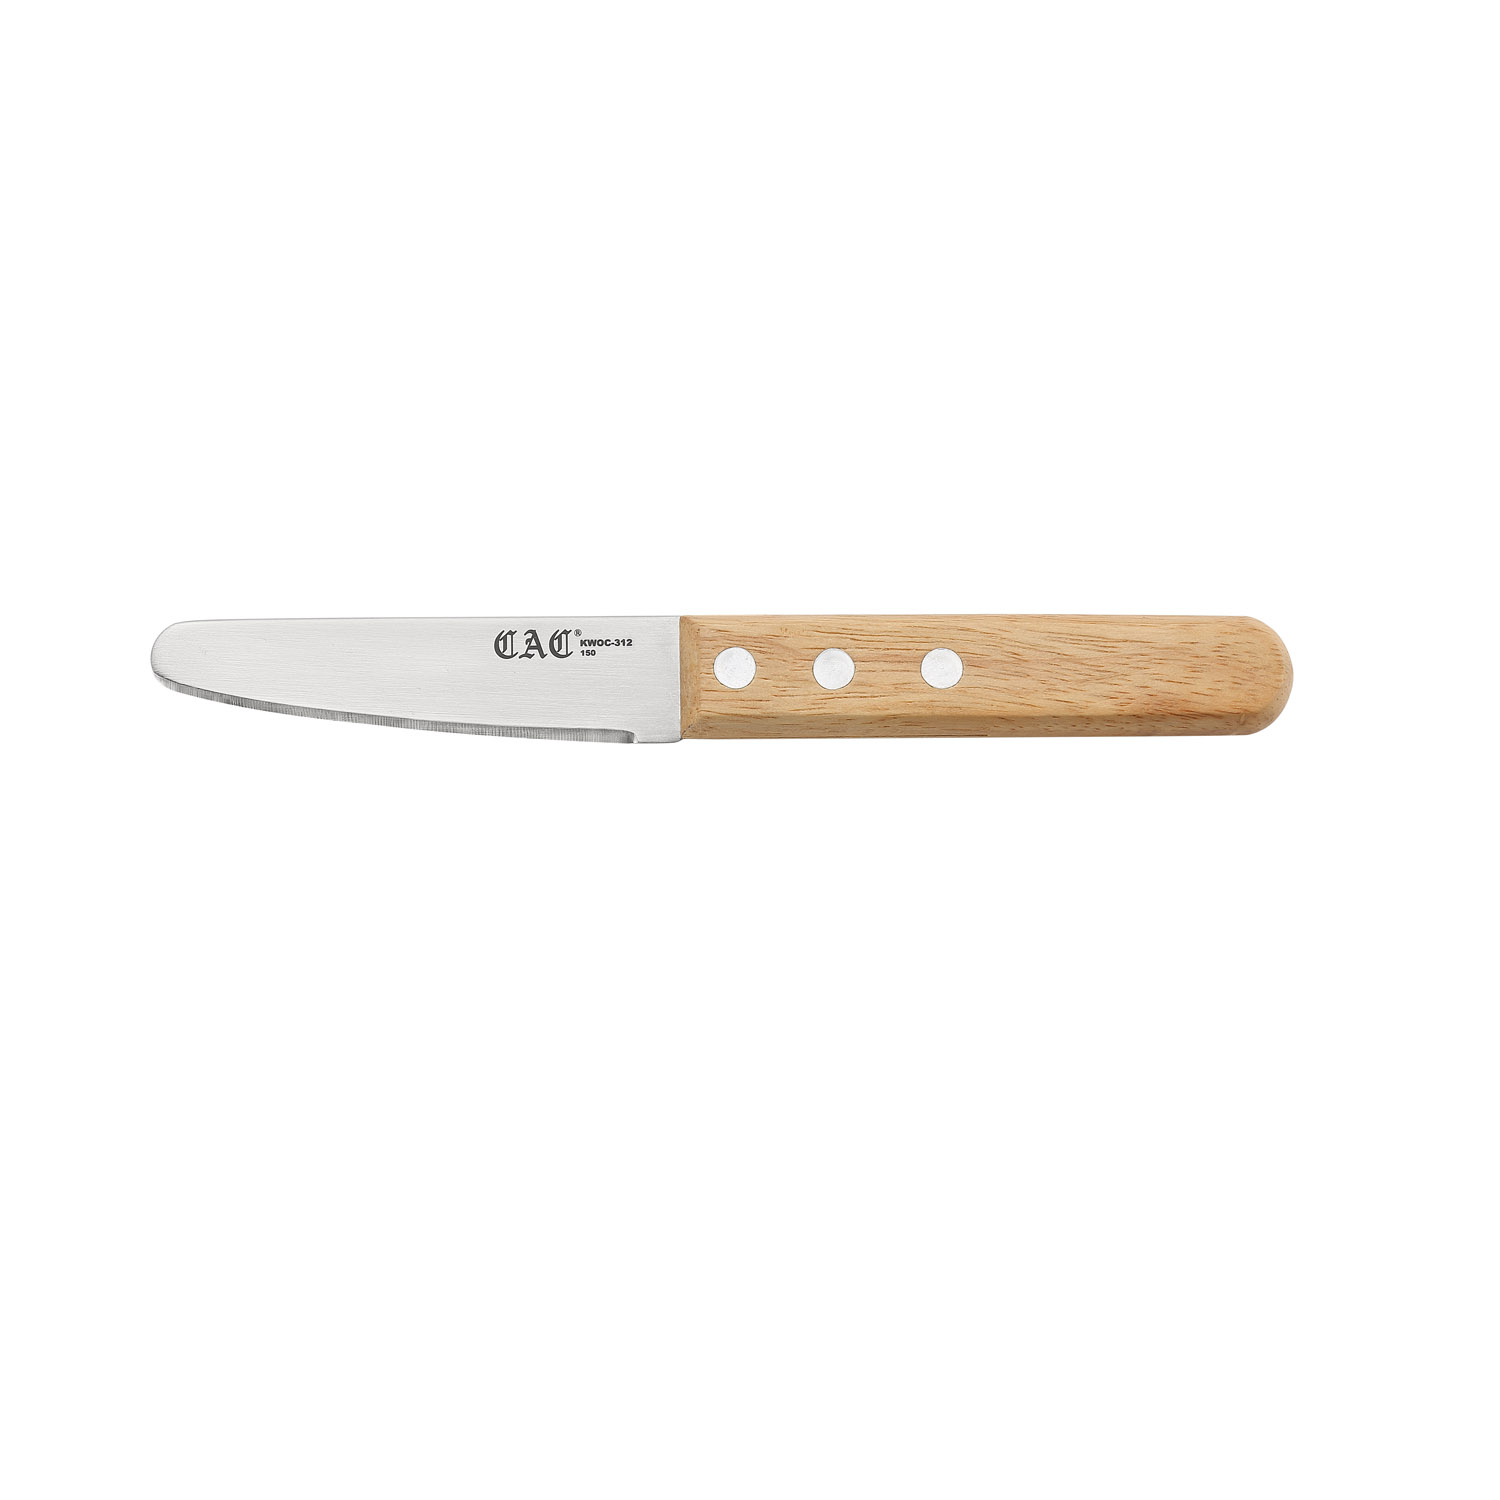 CAC China KWOC-312 Oyster/Clam Knife with Pointed Tip and Wooden Handle 3-1/2"